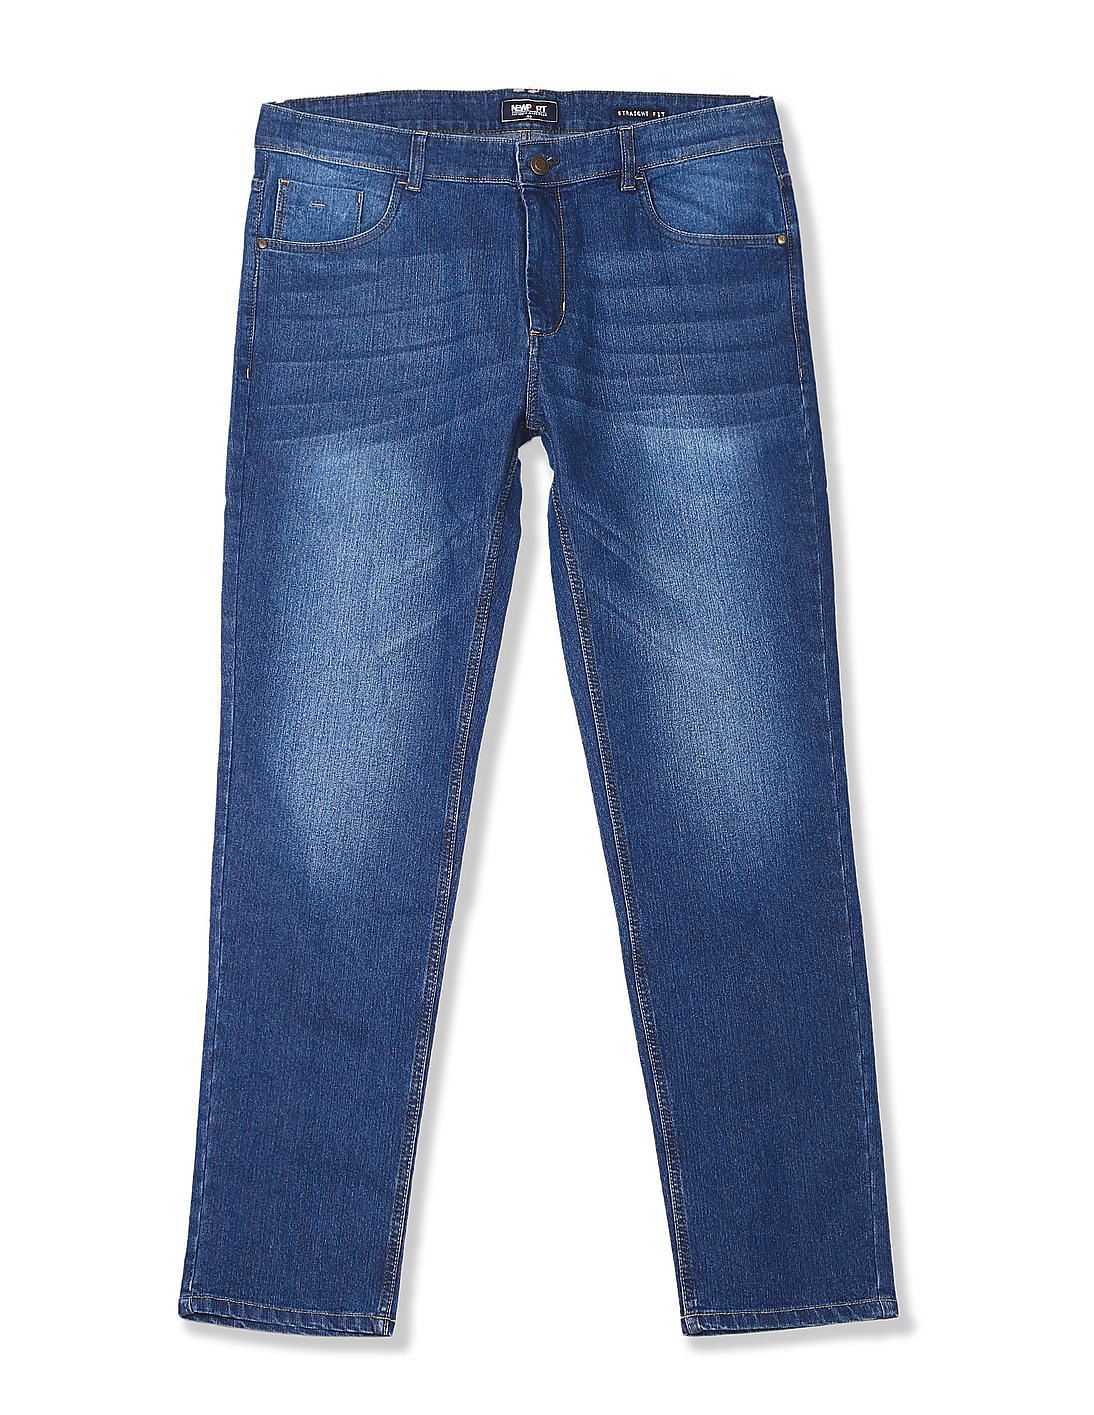 Buy Men Straight Fit Stone Wash Jeans online at NNNOW.com